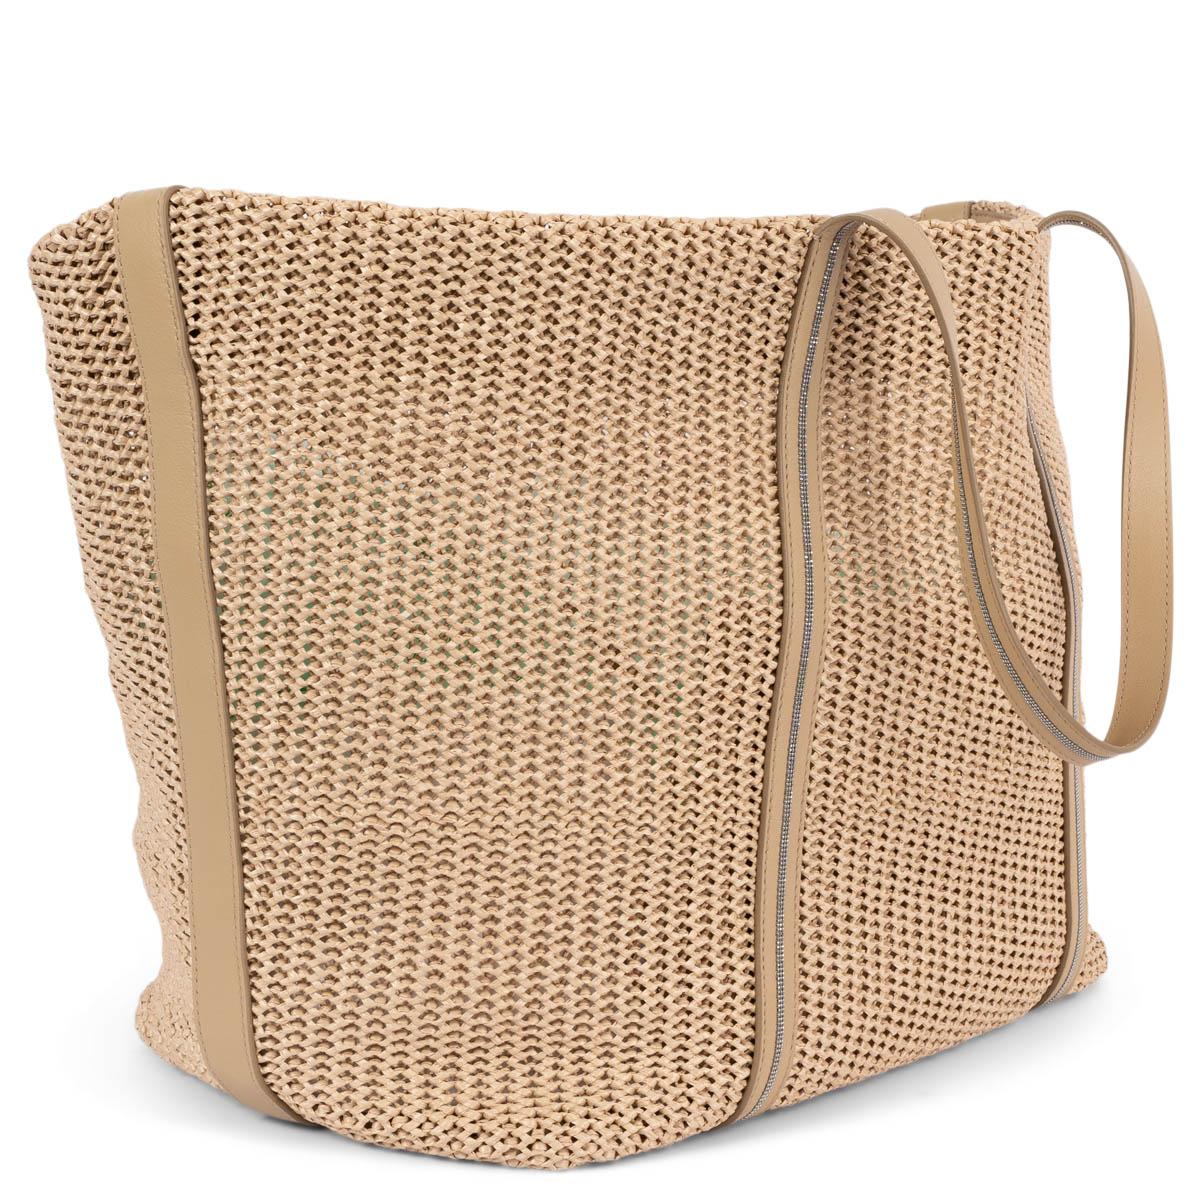 100% authentic Brunello Cucinelli oversized beige raffia tote bag with beige leather handles. Features Monili beading along the straps. Unlined with magnetic closure. The design features a detachable beige leather pouch. Has been carried once and is